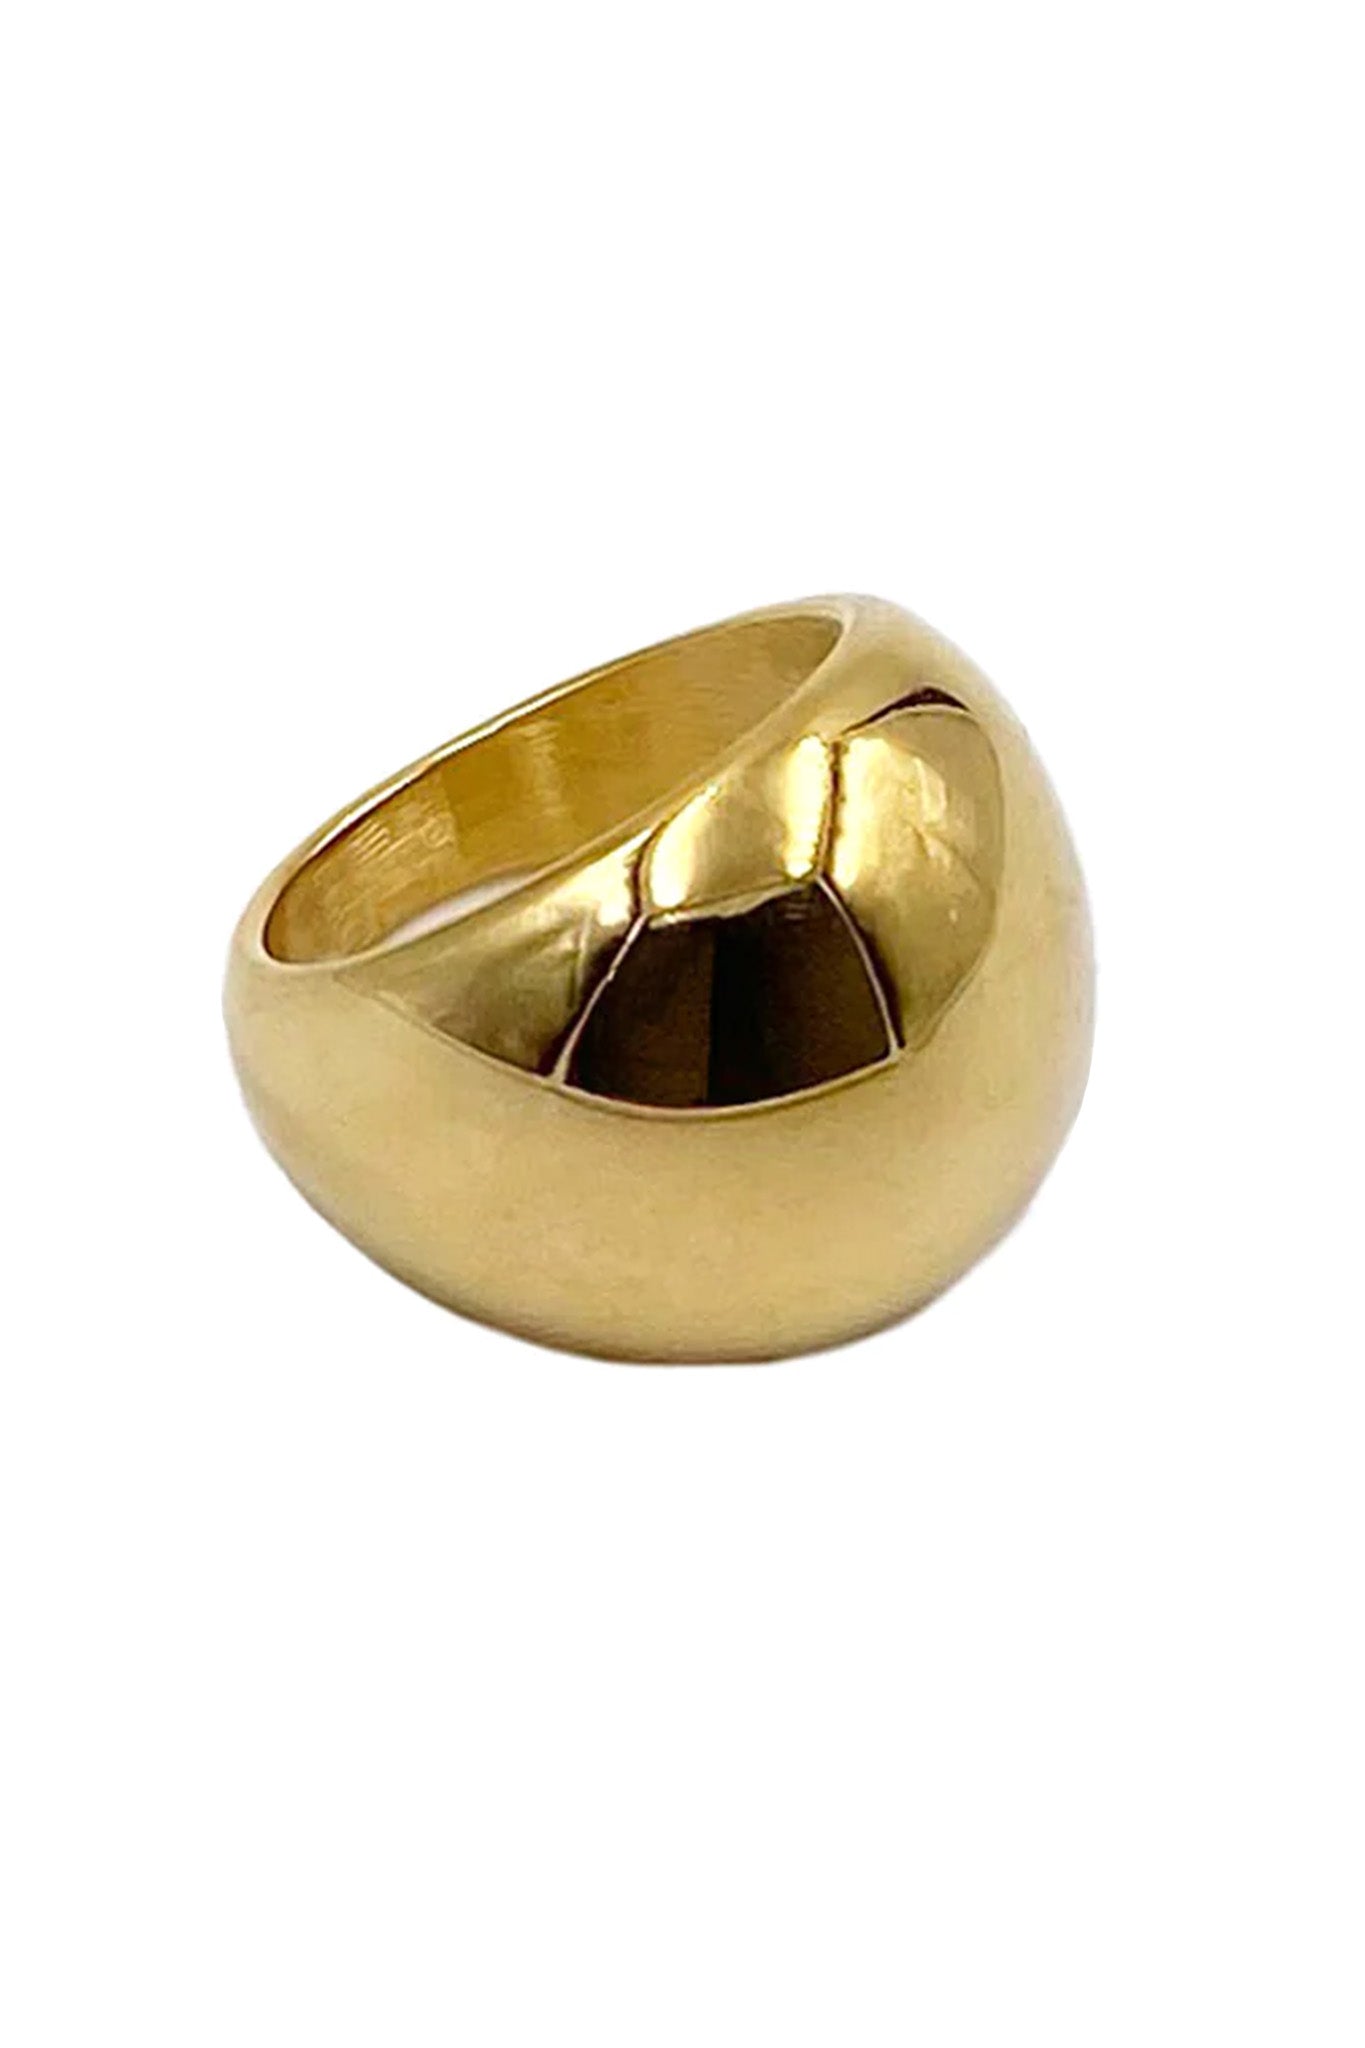 GOLD DOME RING